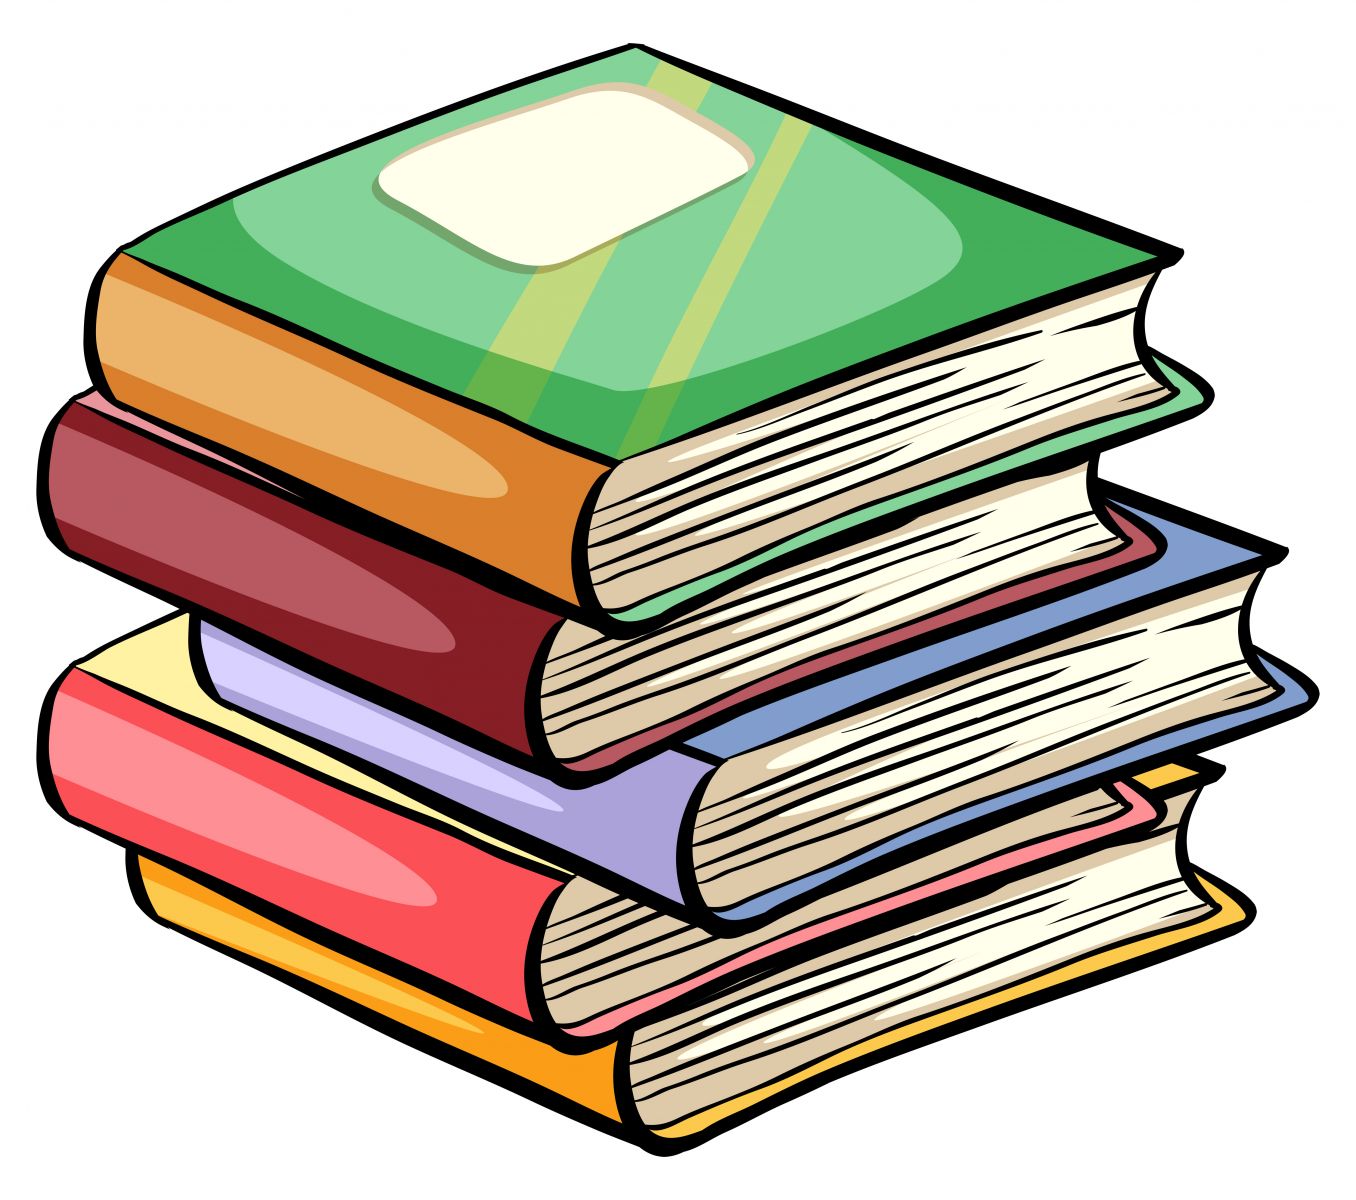 Importance and benefits of reading books in student life